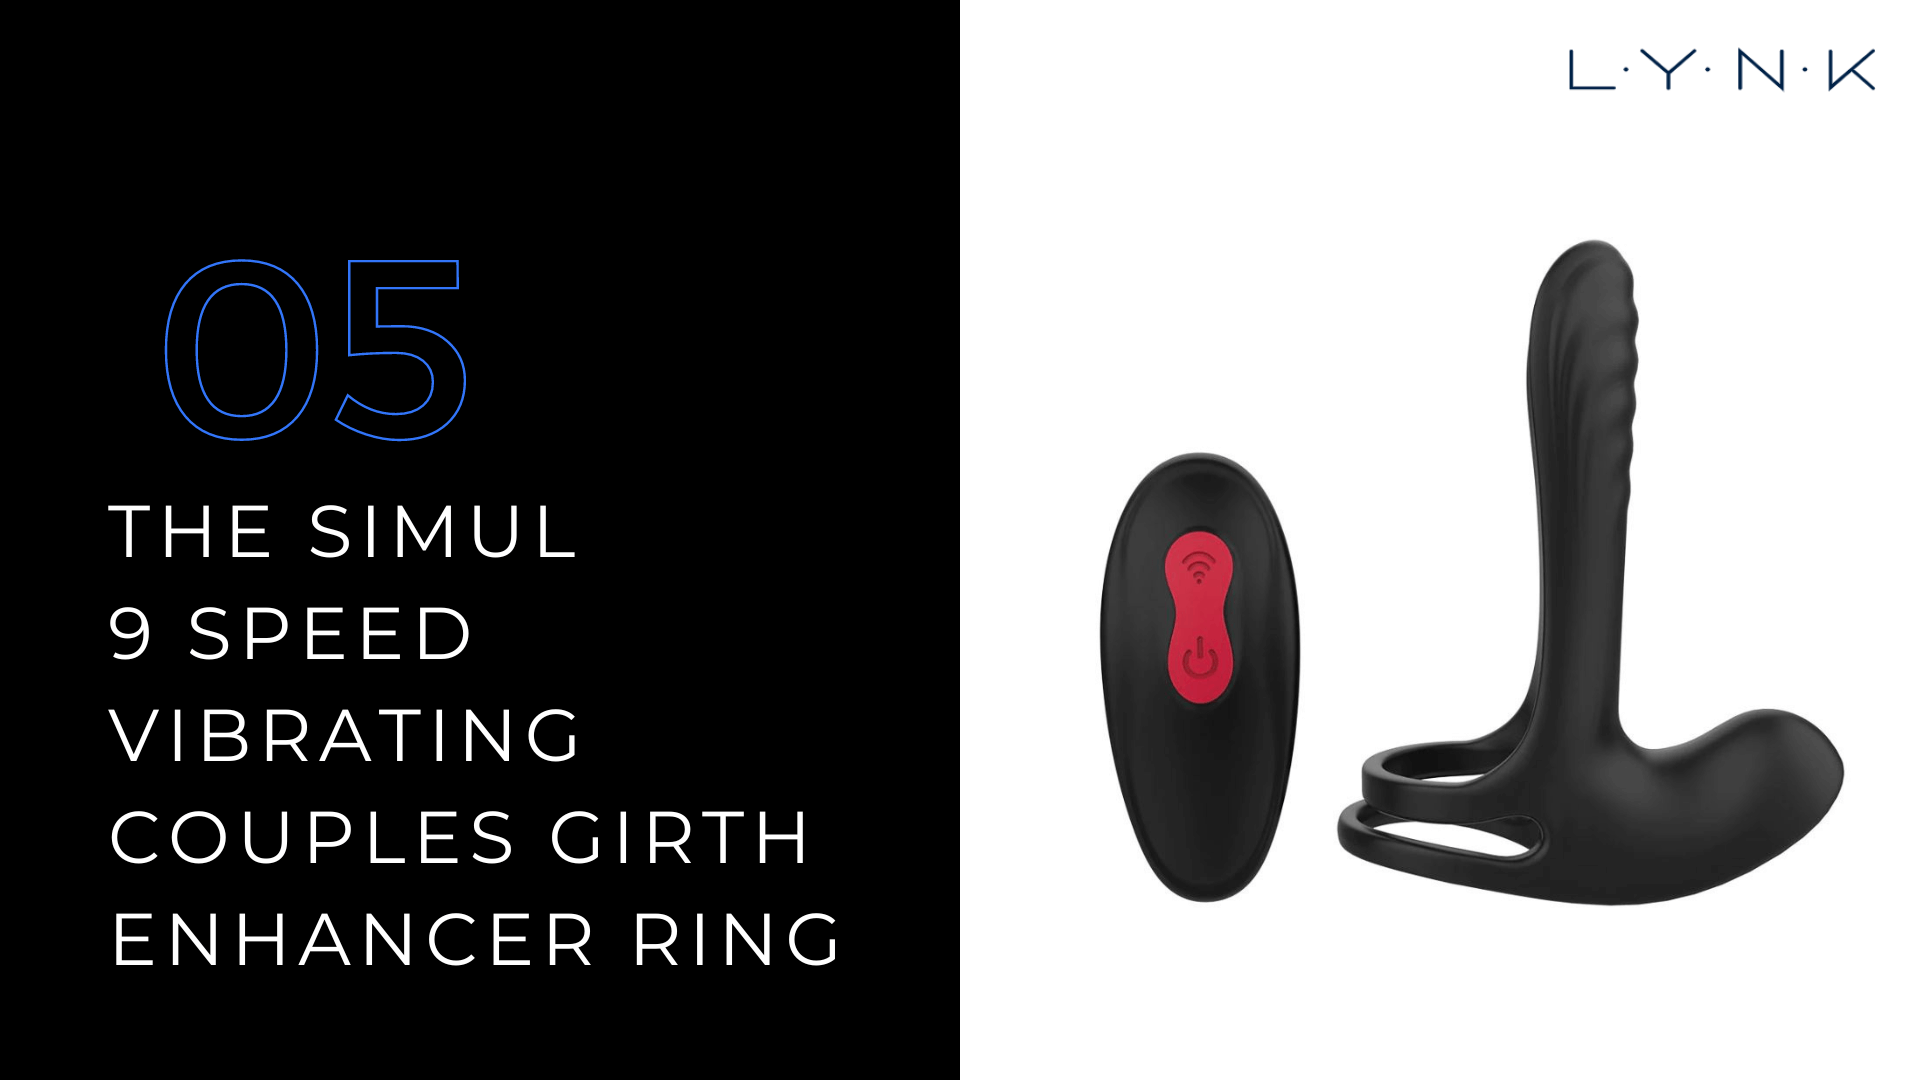 The Simul 9 Speed Vibrating Couples Girth Enhancer Ring